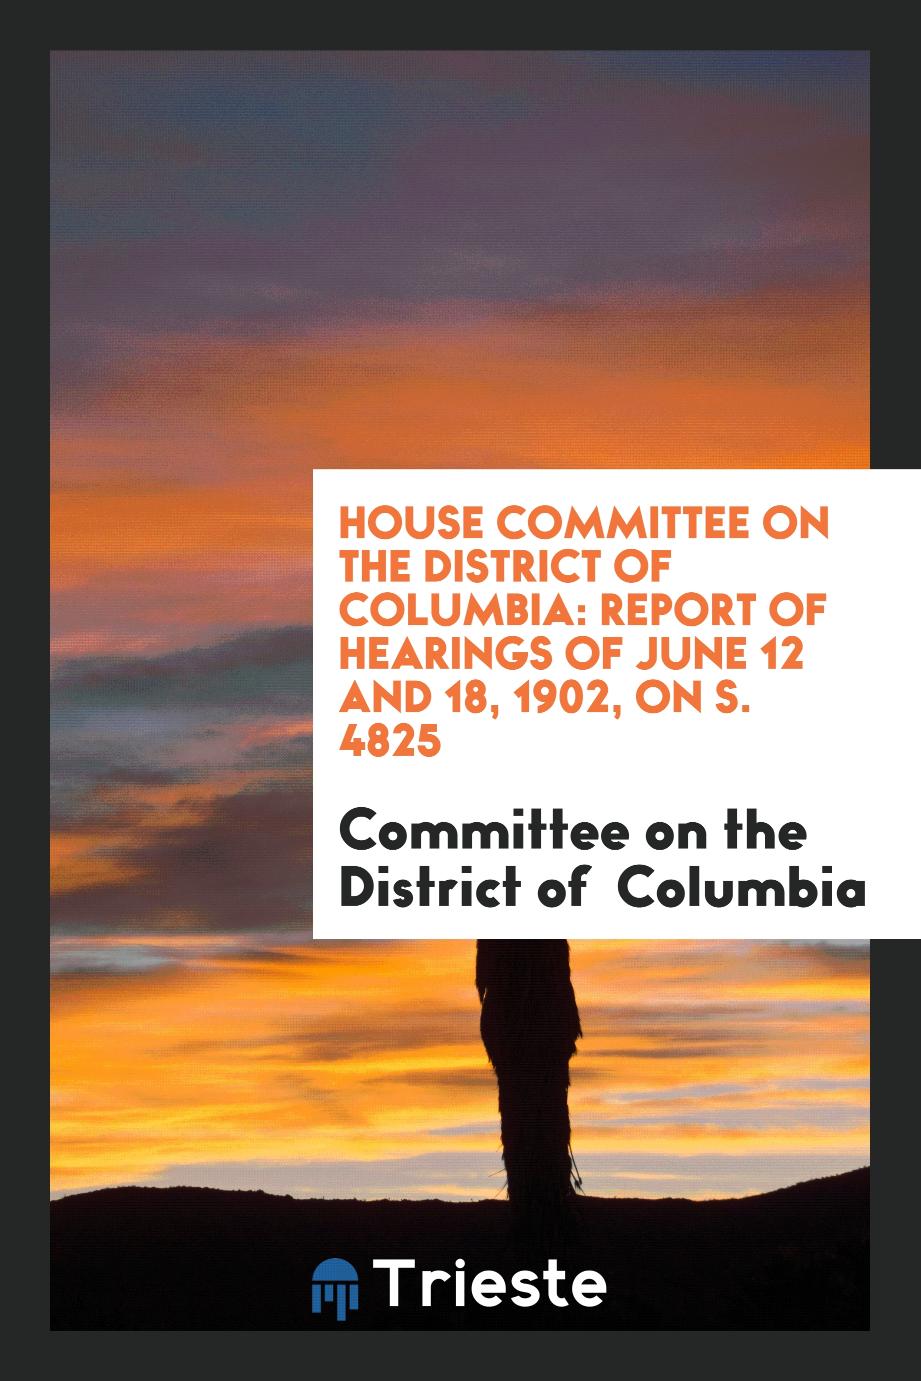 House Committee on the District of Columbia: Report of Hearings of June 12 and 18, 1902, on S. 4825